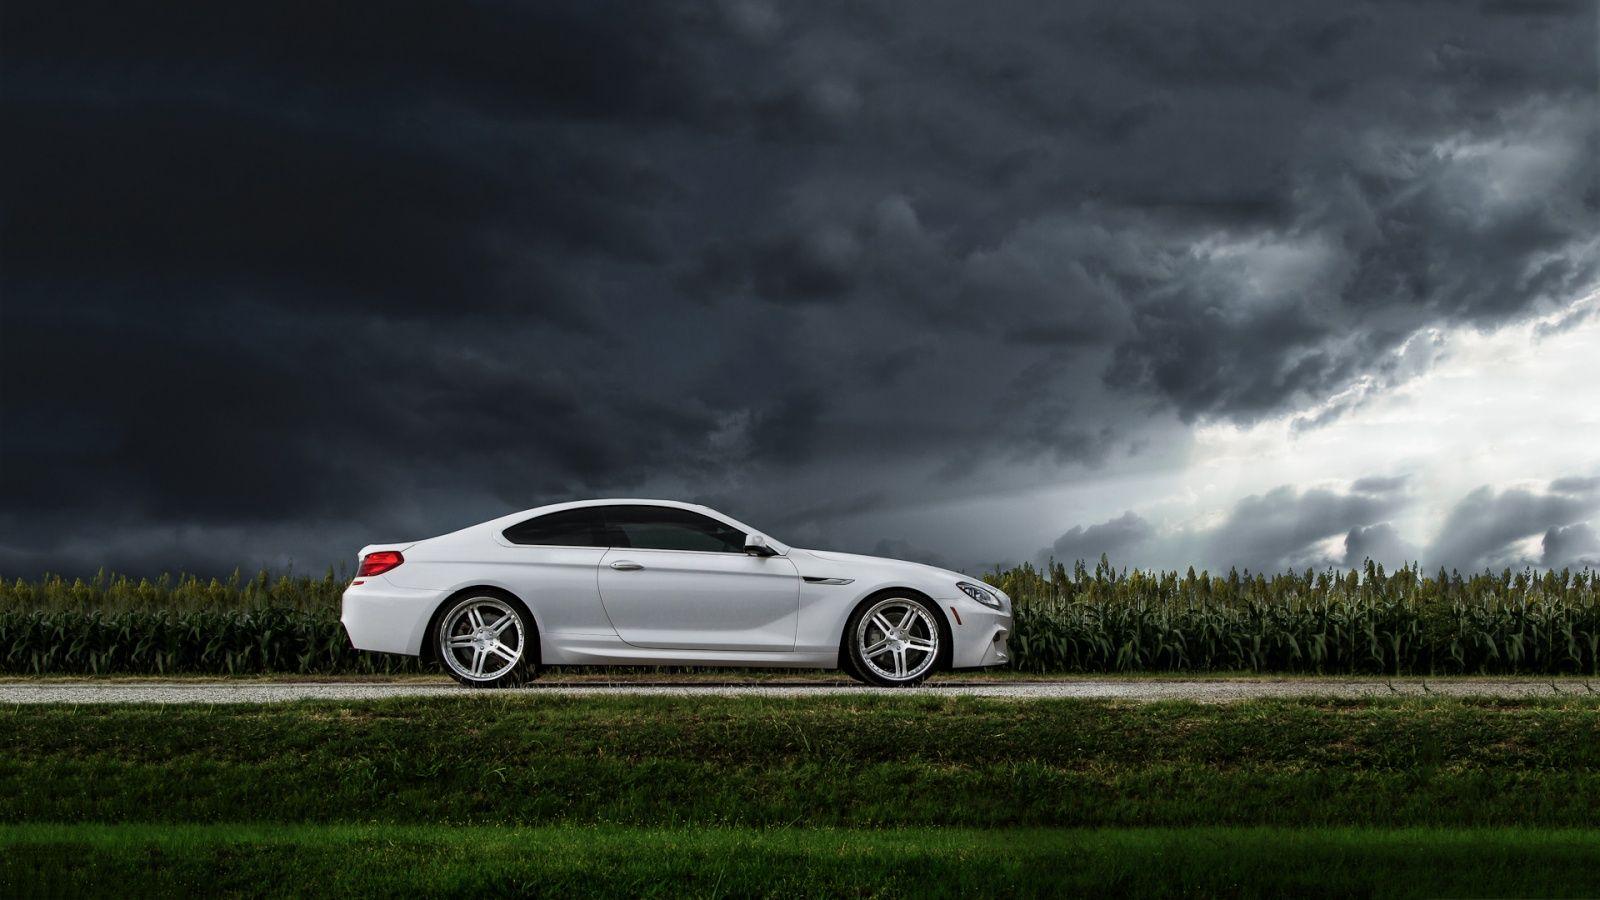 BMW 6 Series Wallpaper In High Quality